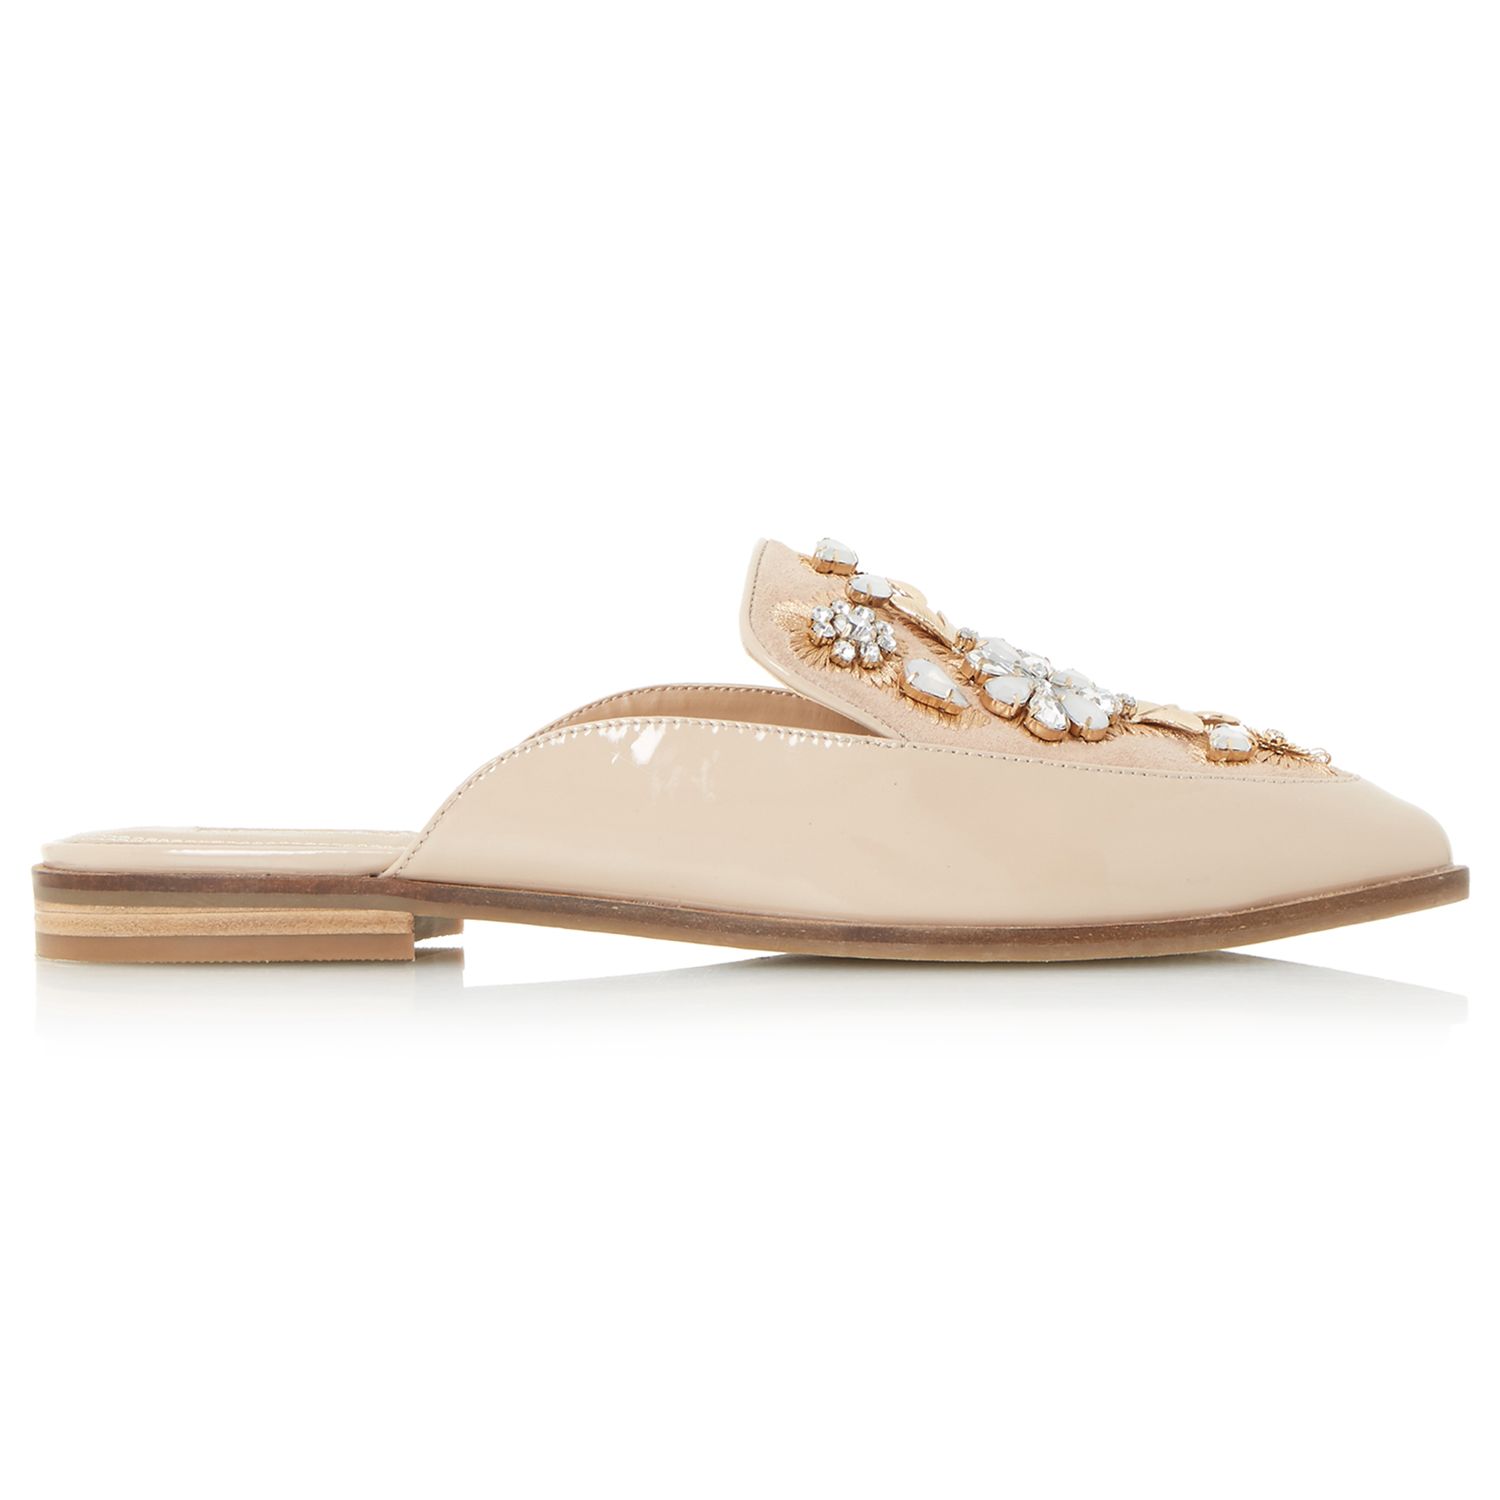 Dune Gemily Embellished Pointed Toe Mule Loafers, Nude, 6